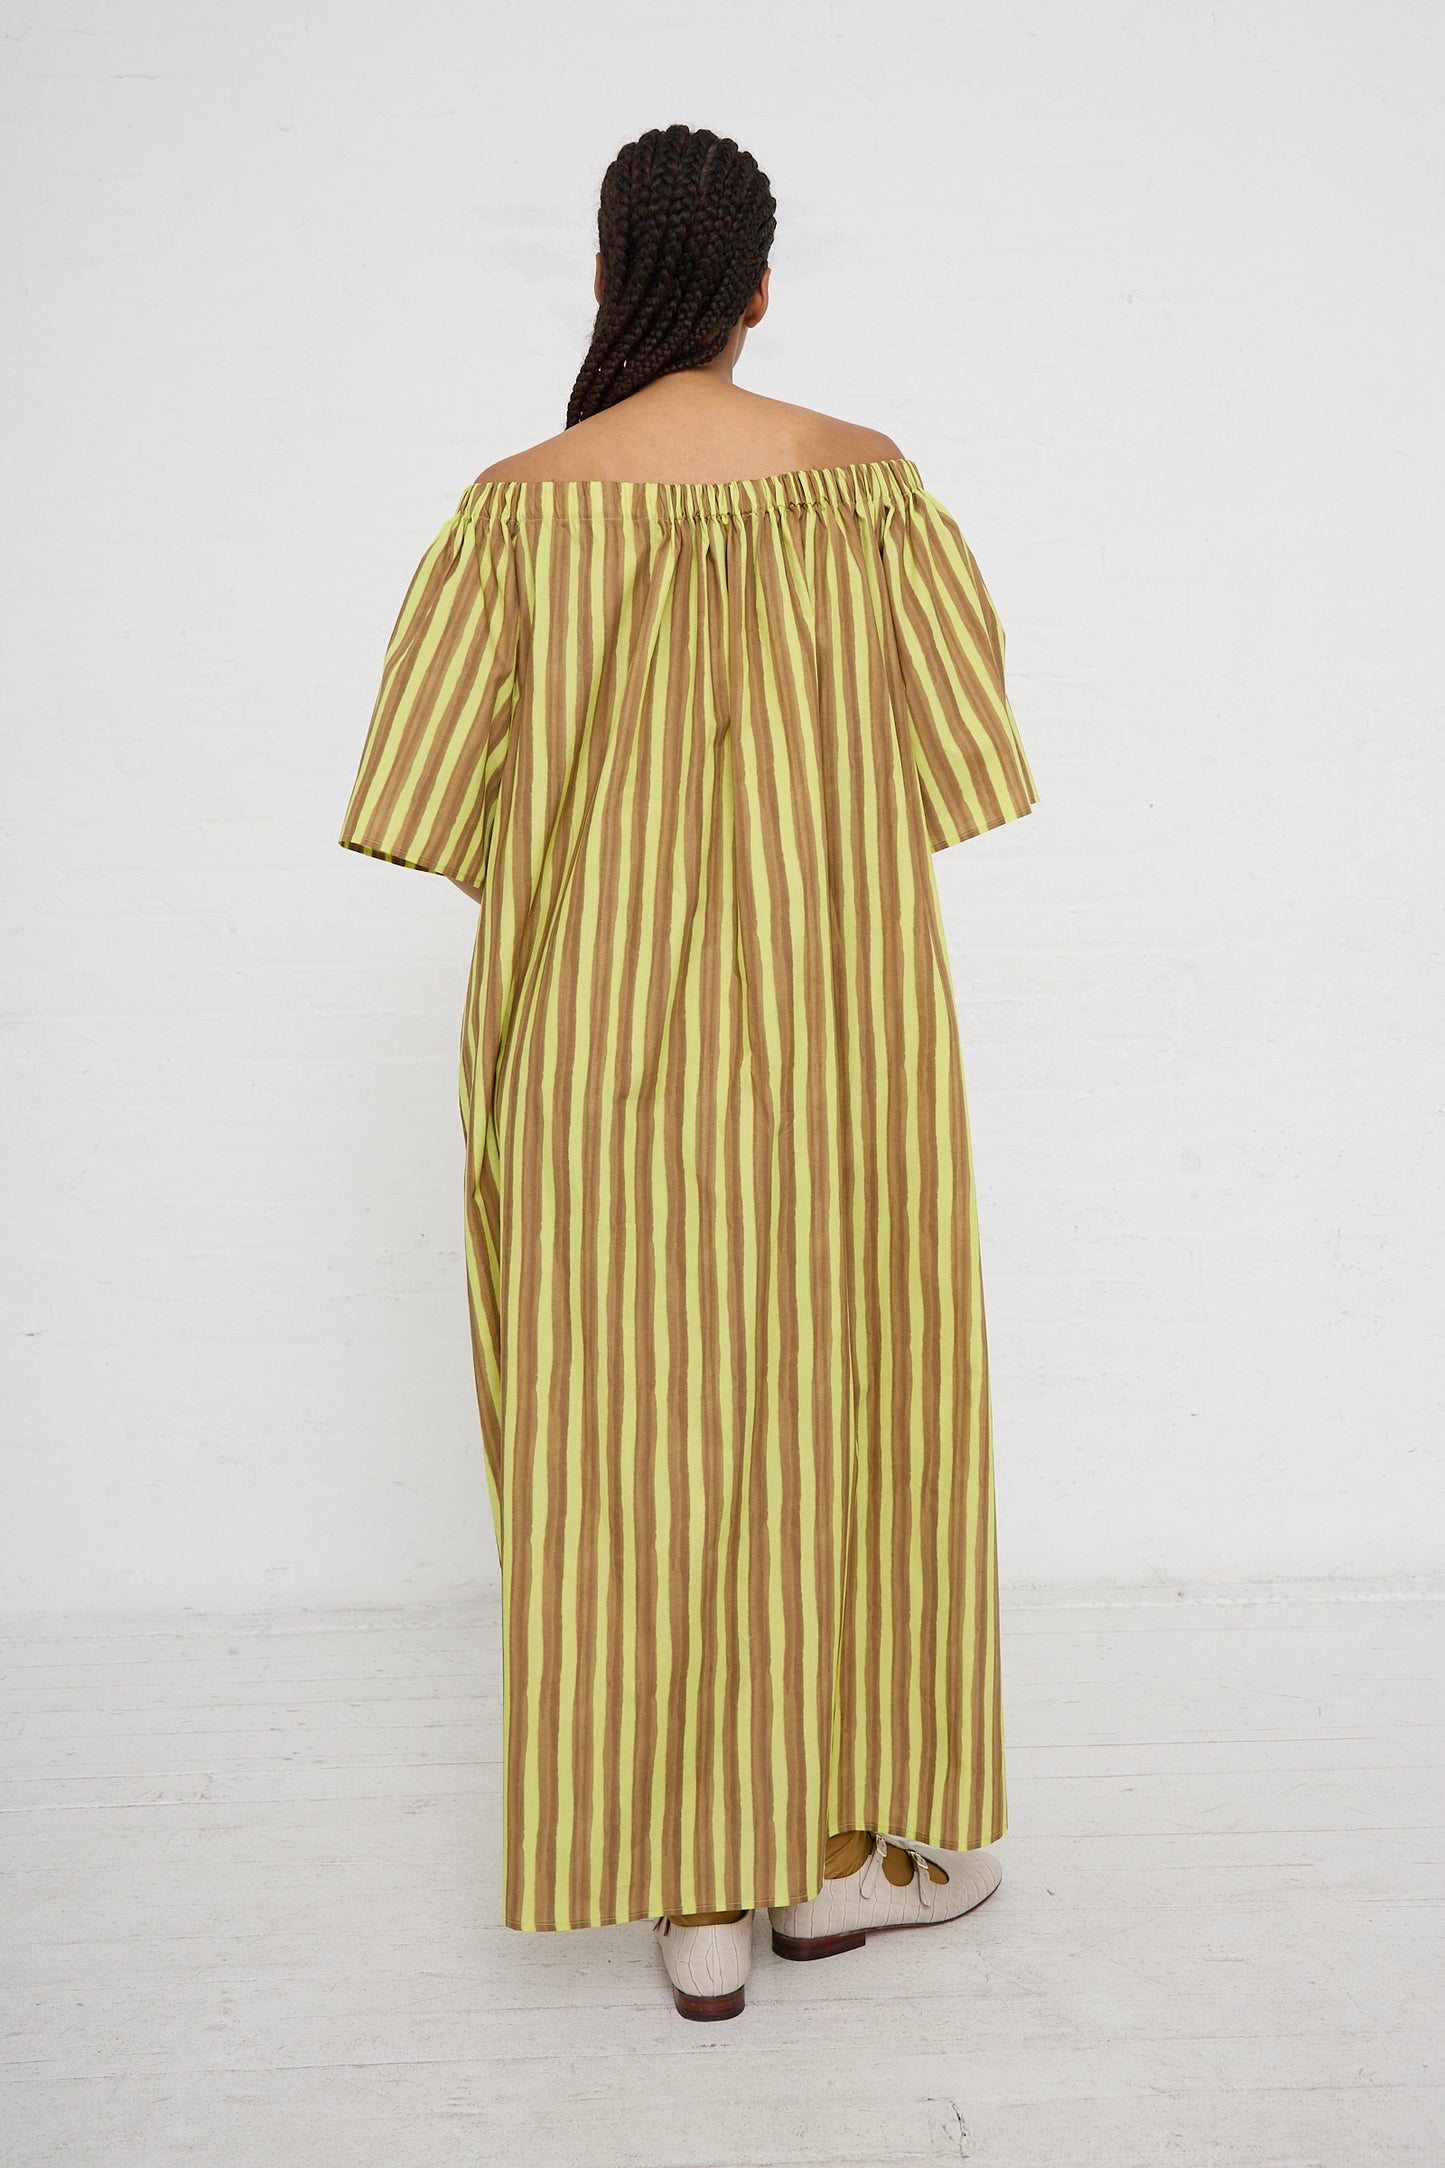 Sentence with replaced product: A person standing with their back to the camera, wearing a AVN striped cotton maxi dress with oversized short sleeves and brown shoes.